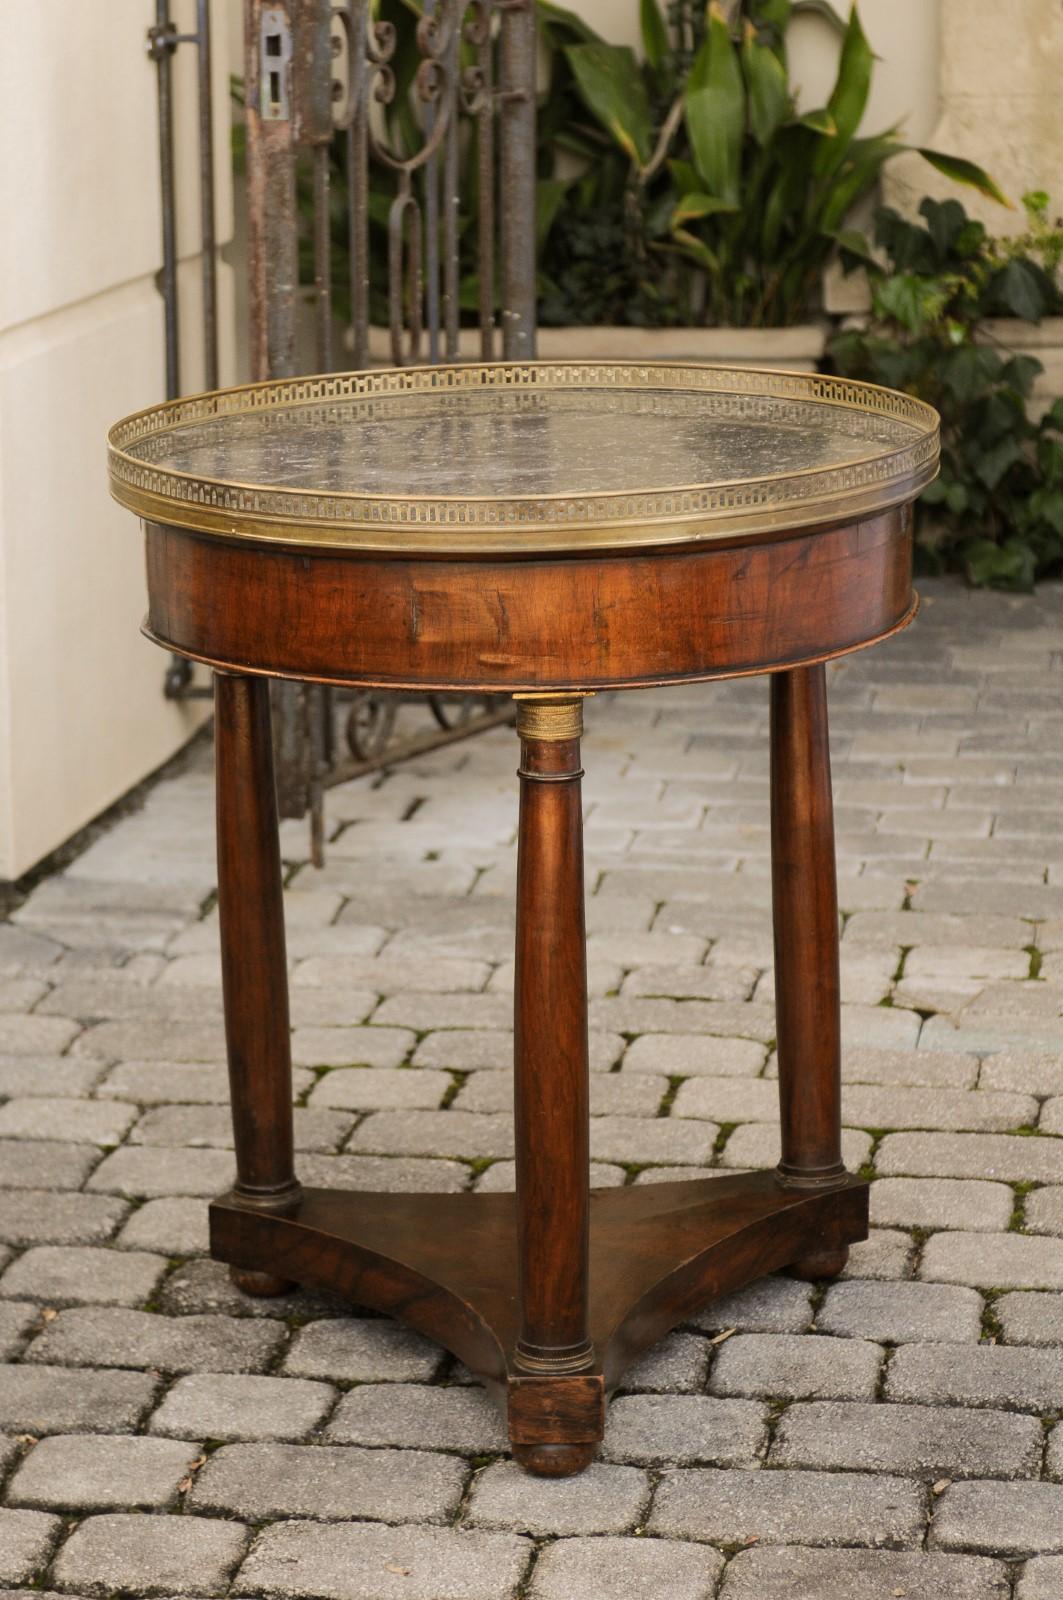 A French period Empire walnut guéridon side table from the early 19th century, with grey marble top and bronze mounts. Born in the first quarter of the 19th century under the reign of France's first Emperor Napoleon I, this exquisite guéridon